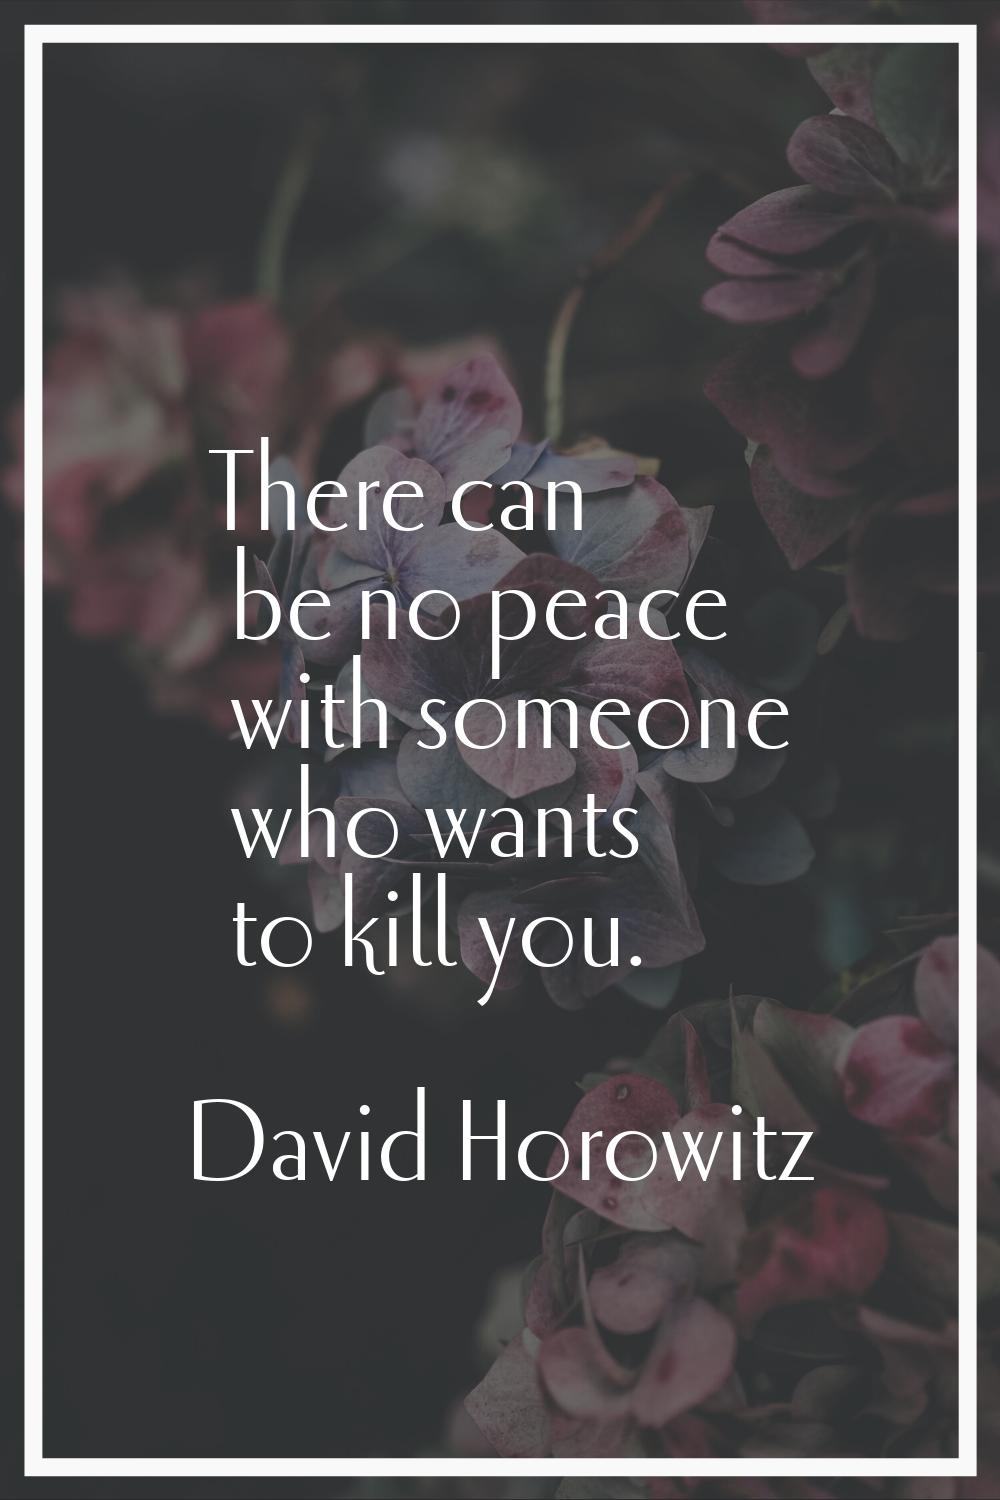 There can be no peace with someone who wants to kill you.